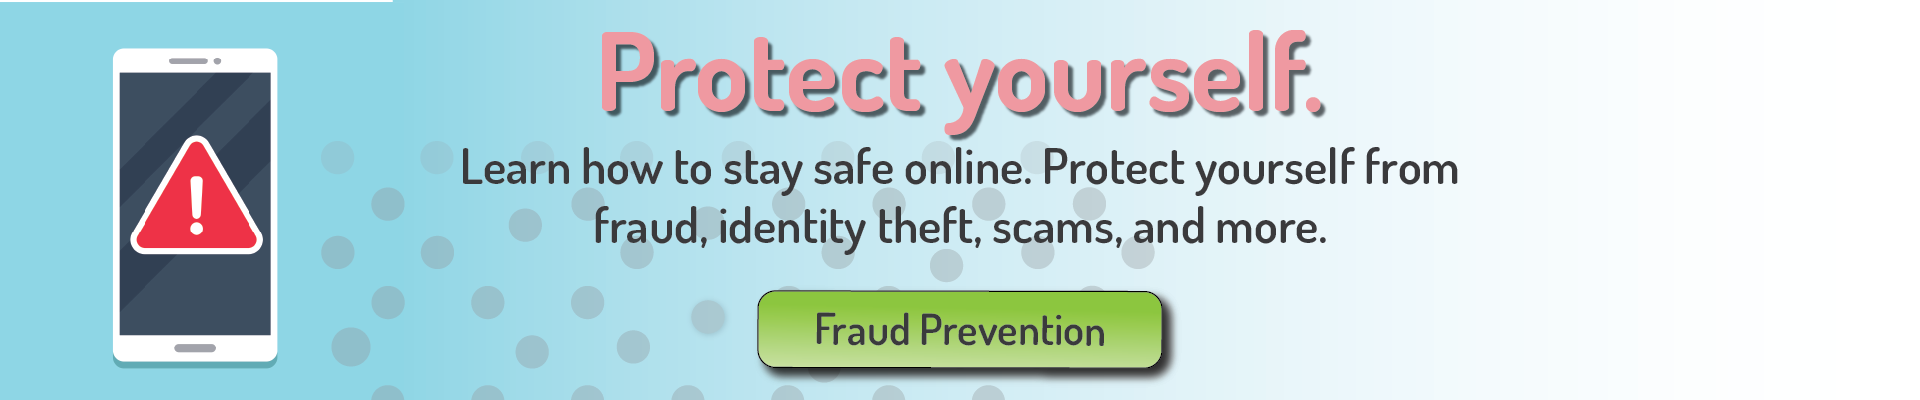 Protect yourself.
Learn how to stay safe online. protect yourself from fraud, identity theft, scams, and more.
Fraud Prevention